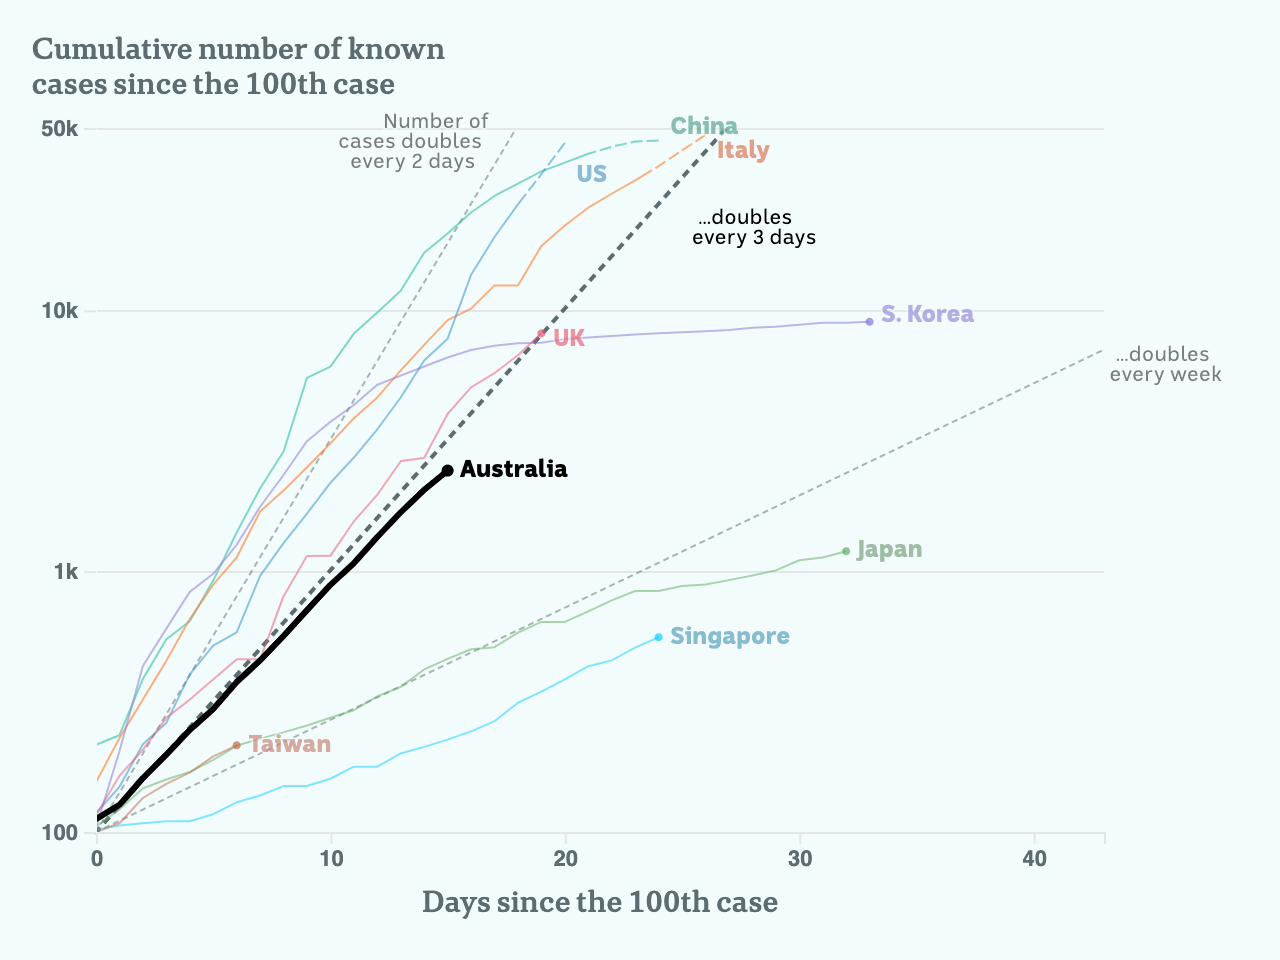 Charted growth in Australia, following the doubling every three days trend line.